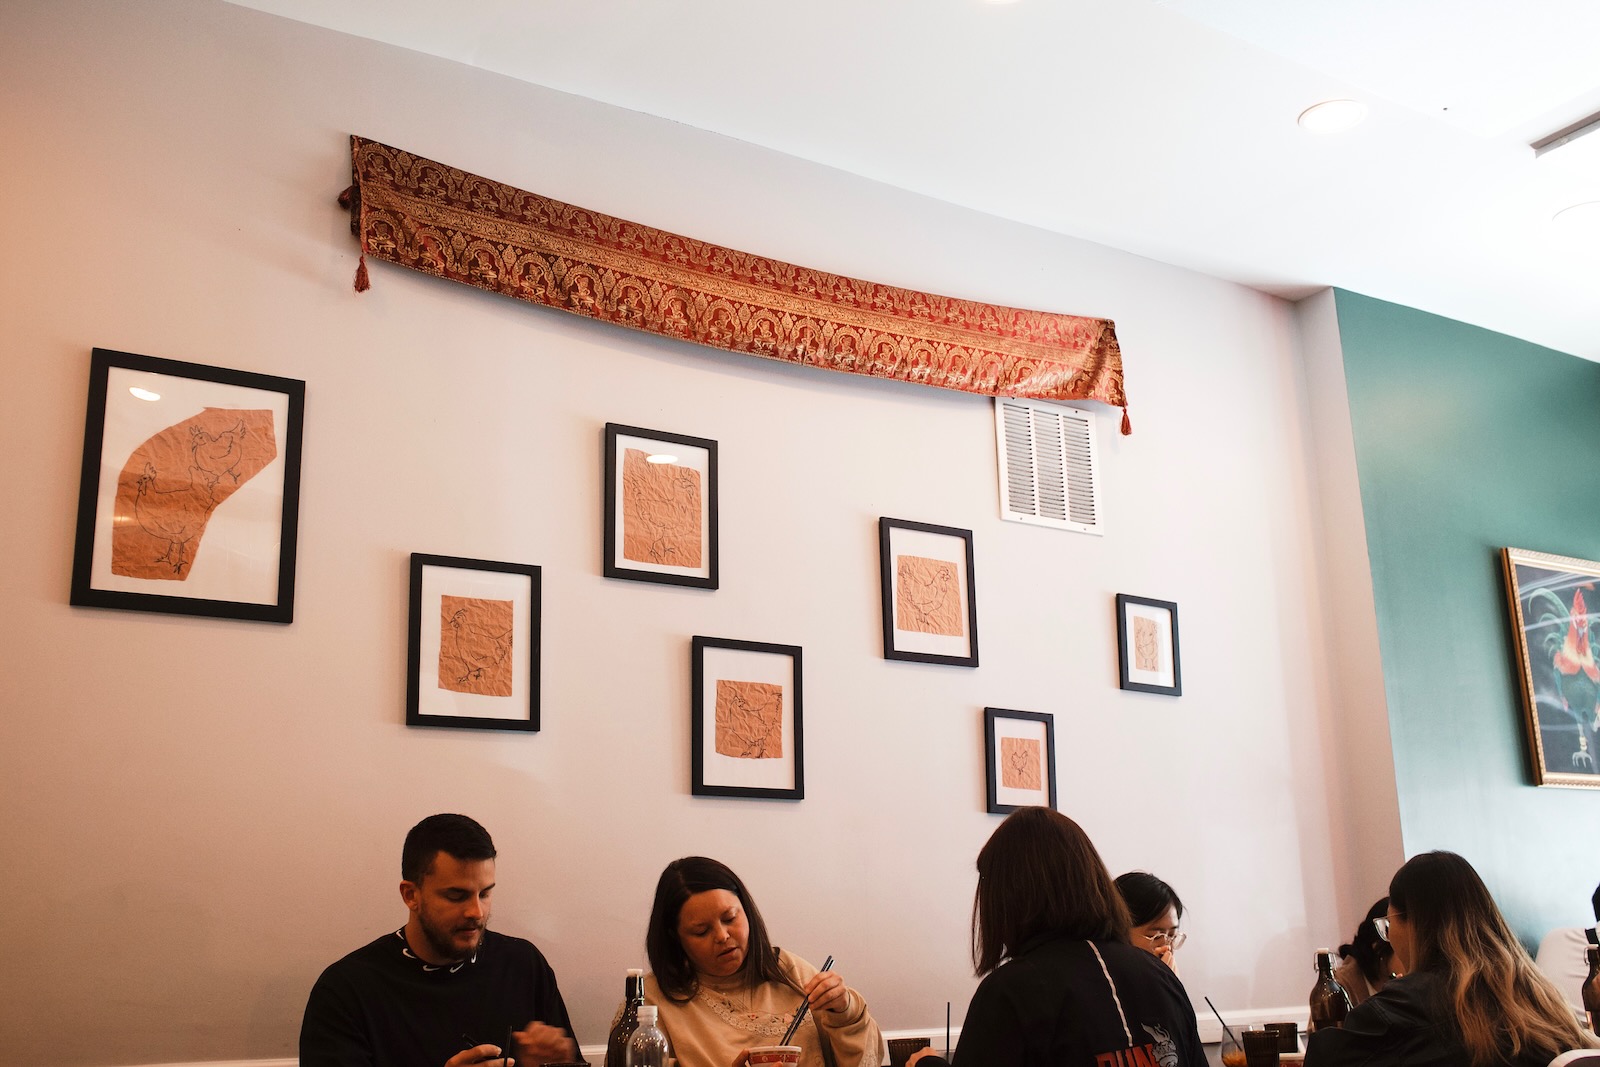 Diners share a meal. In the wall behind them is an arrangement of several framed prints of illustrated chickens, and an elaborate printed cloth stretched across the top of several of the frames.